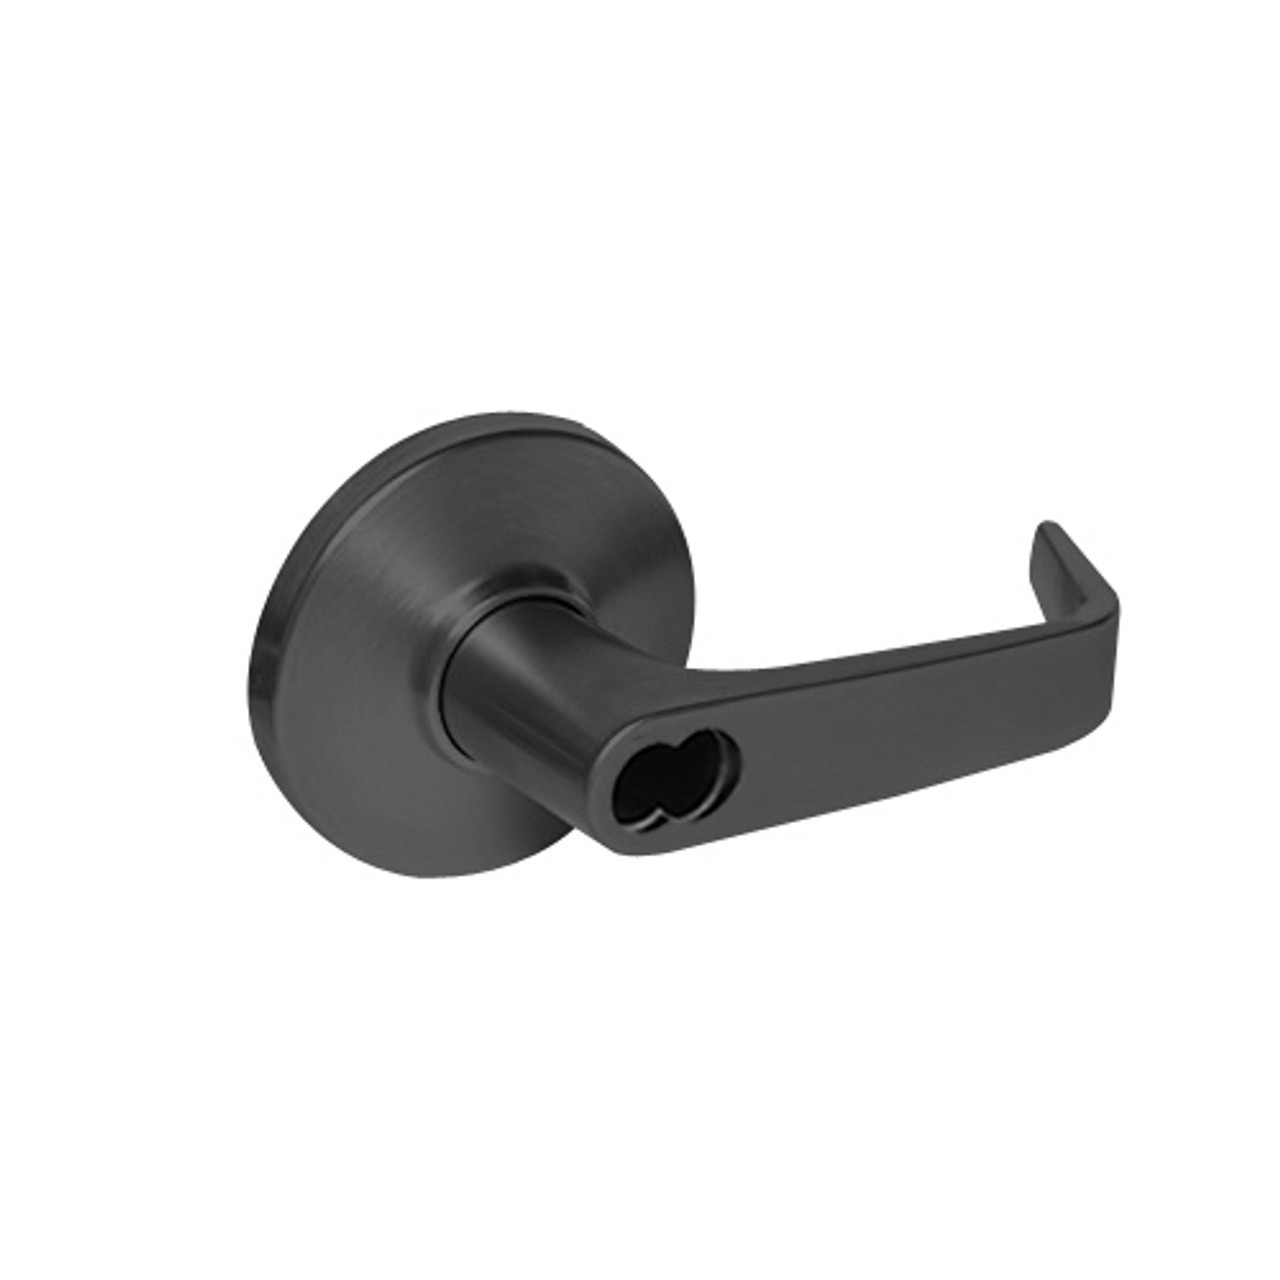 9K37A15DS3622LM Best 9K Series Dormitory or Storeroom Cylindrical Lever Locks with Contour Angle with Return Lever Design Accept 7 Pin Best Core in Black